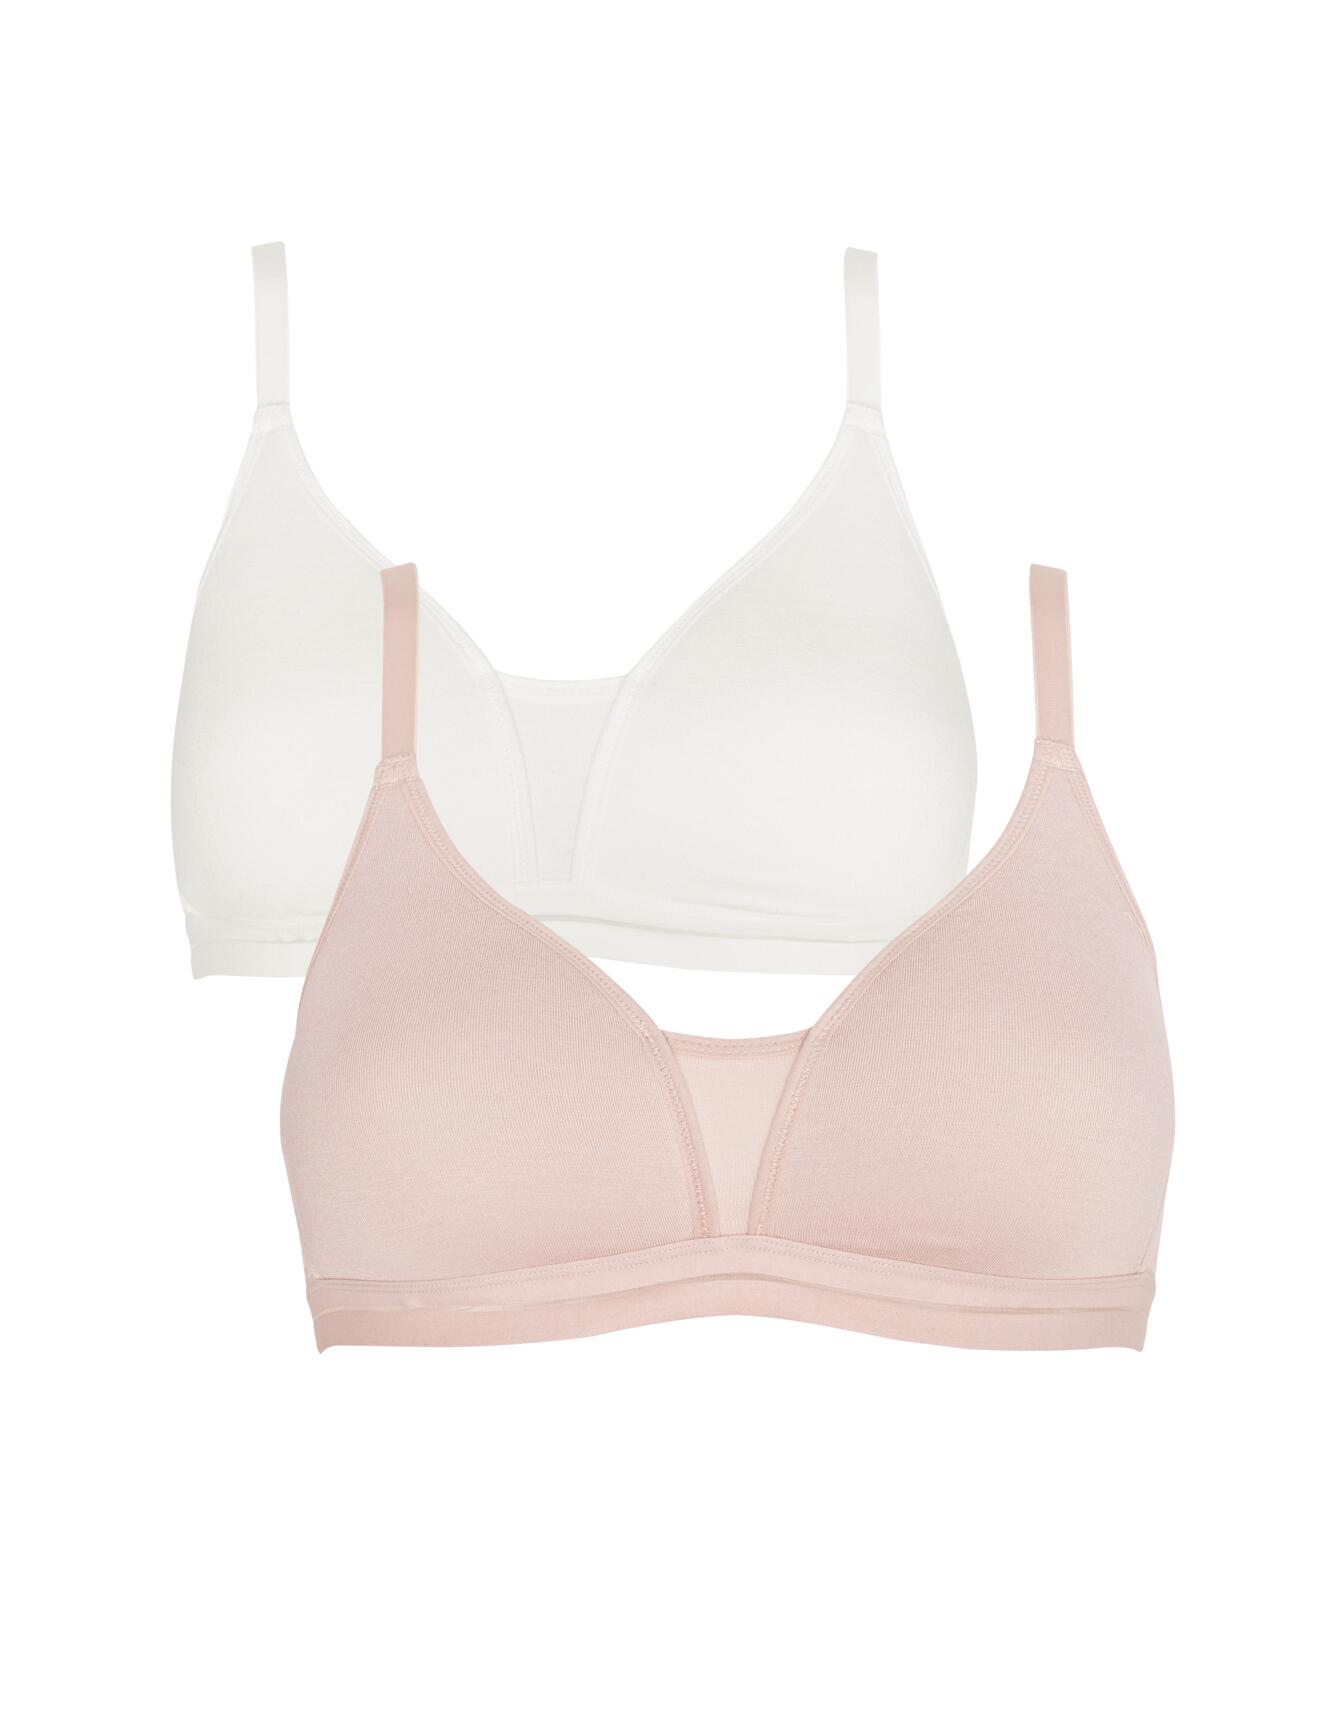 Royce Posie: Non Wired T-shirt Bra 2 Pack 8019 - Blush and Ivory